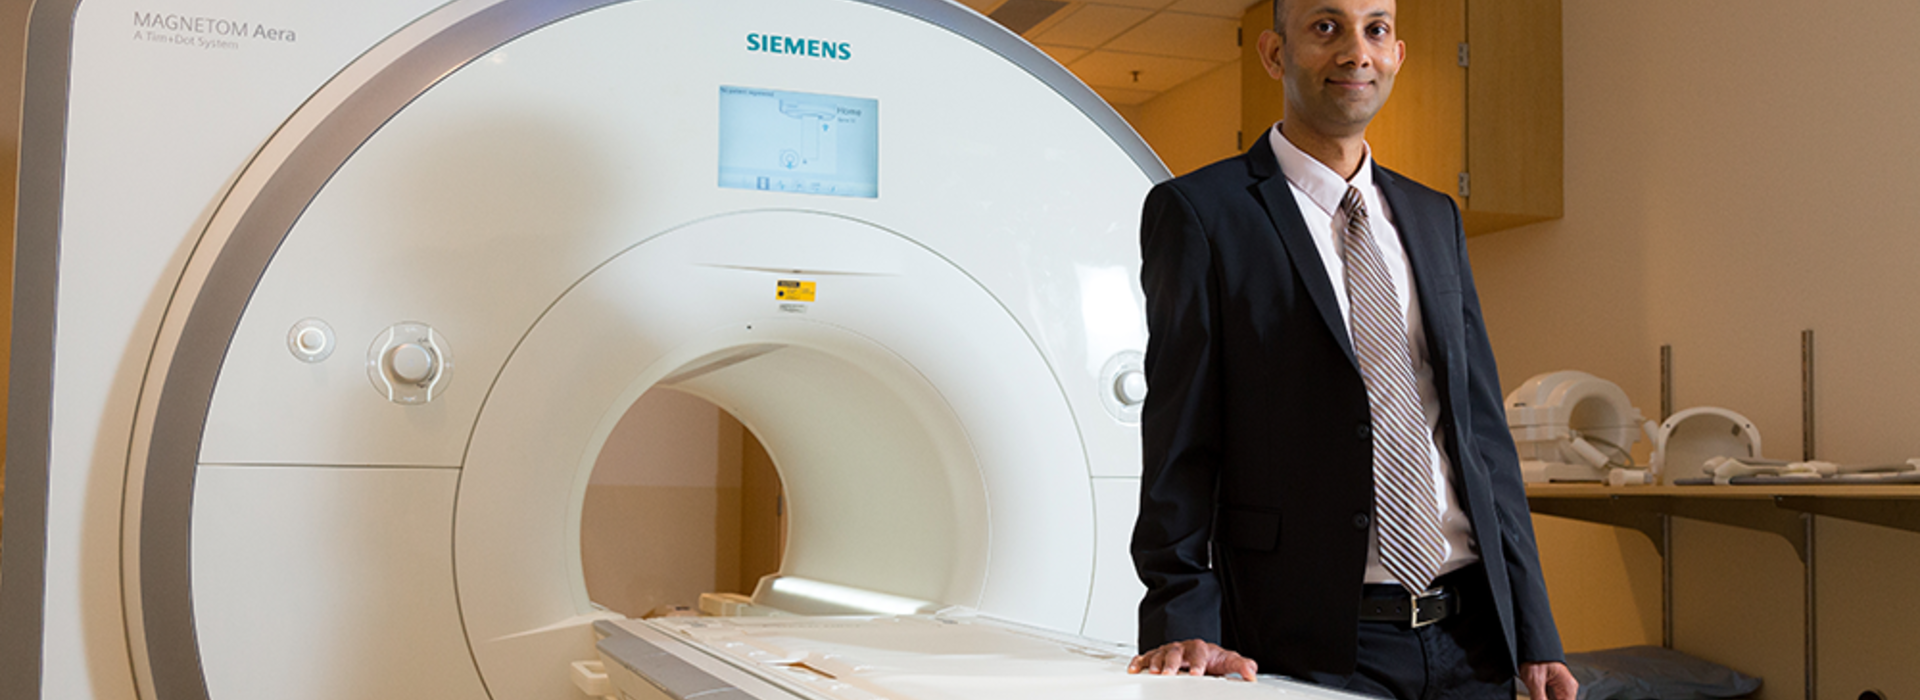 Dr. Chetan Shenoy standing in front of an MRI machine.